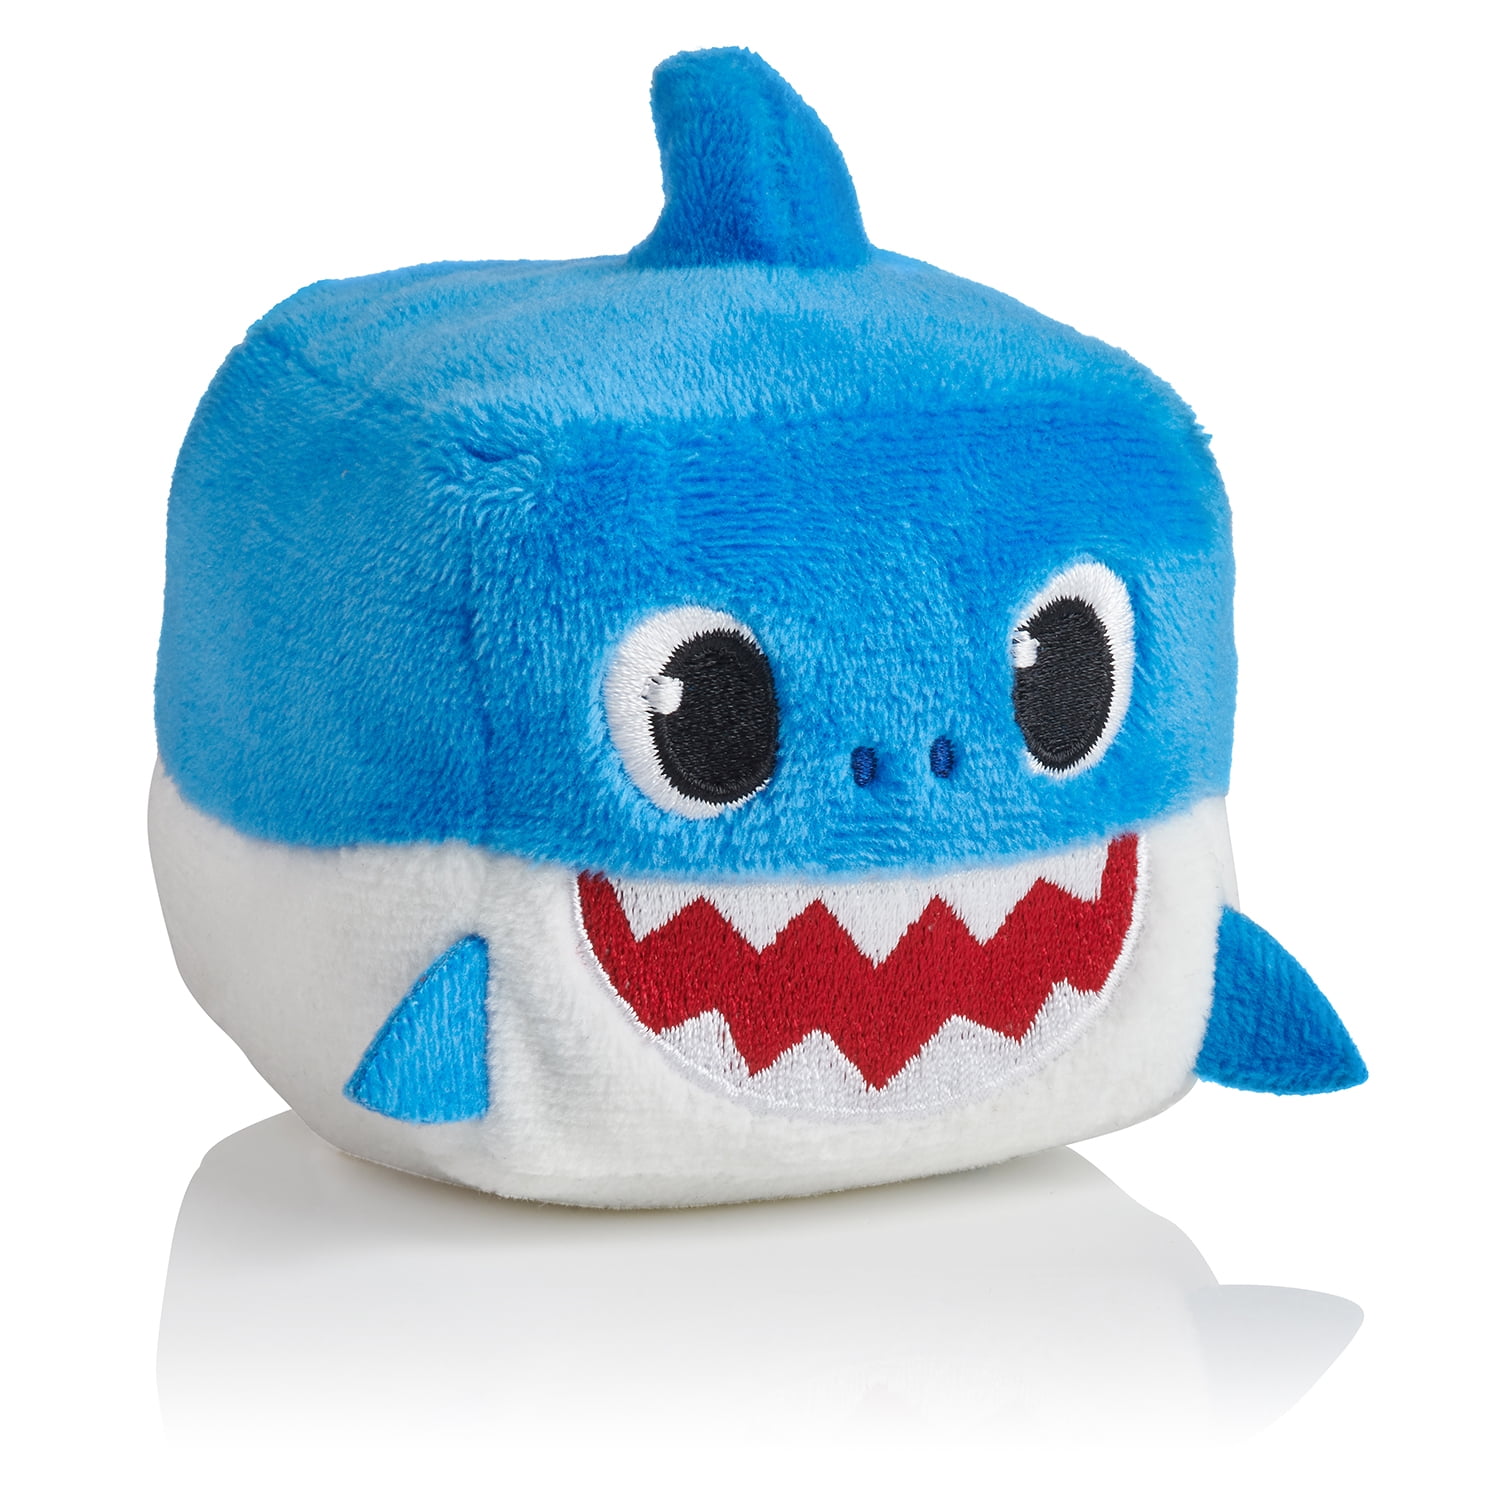 IN STOCK WowWee Blue DADDY Baby Shark Cube Plush Pinkfong SINGING English US 